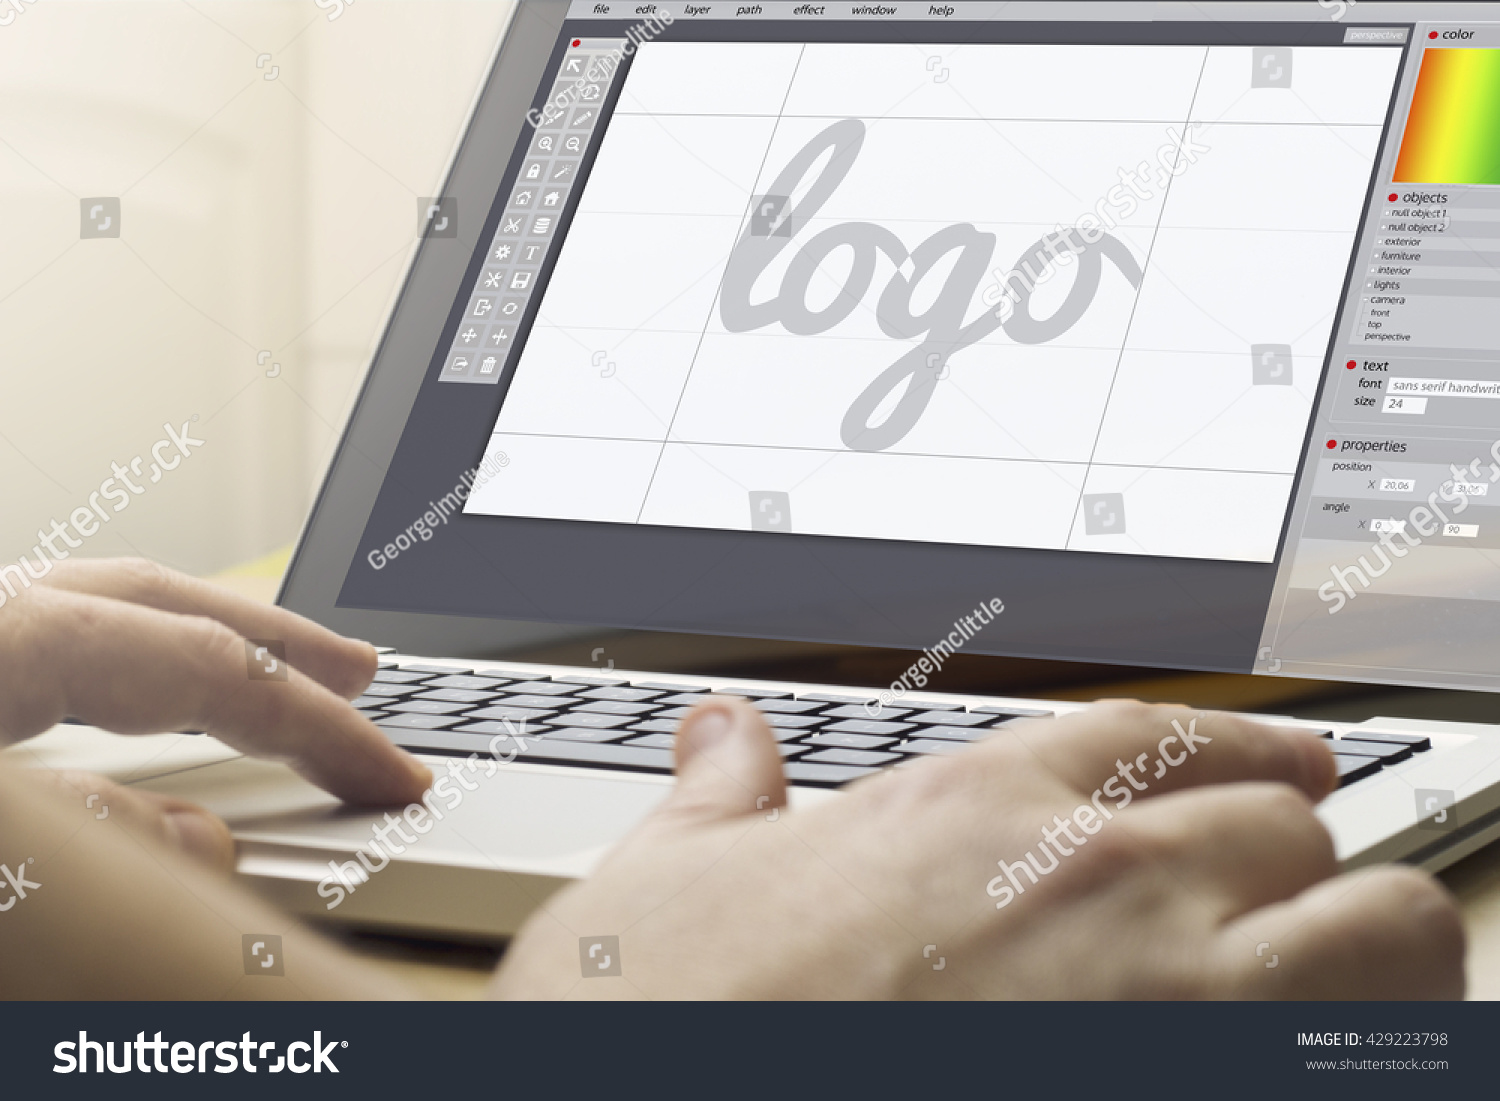 logo design concept: man using a laptop with logo design software on the screen. Screen graphics are made up. #429223798